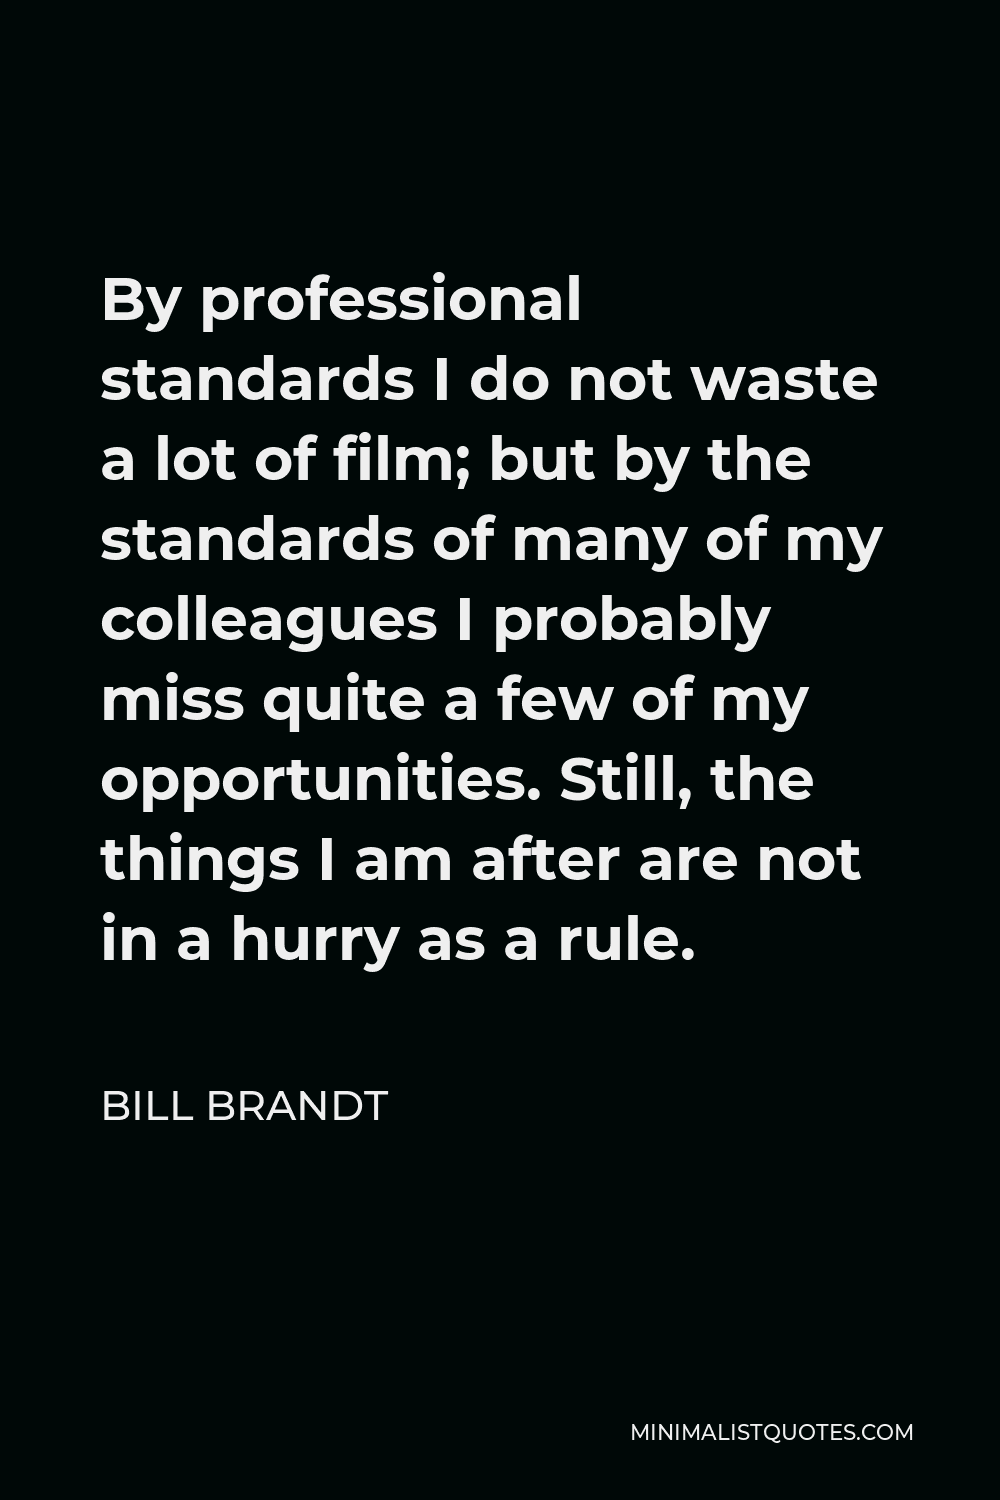 Bill Brandt Quote - By professional standards I do not waste a lot of film; but by the standards of many of my colleagues I probably miss quite a few of my opportunities. Still, the things I am after are not in a hurry as a rule.